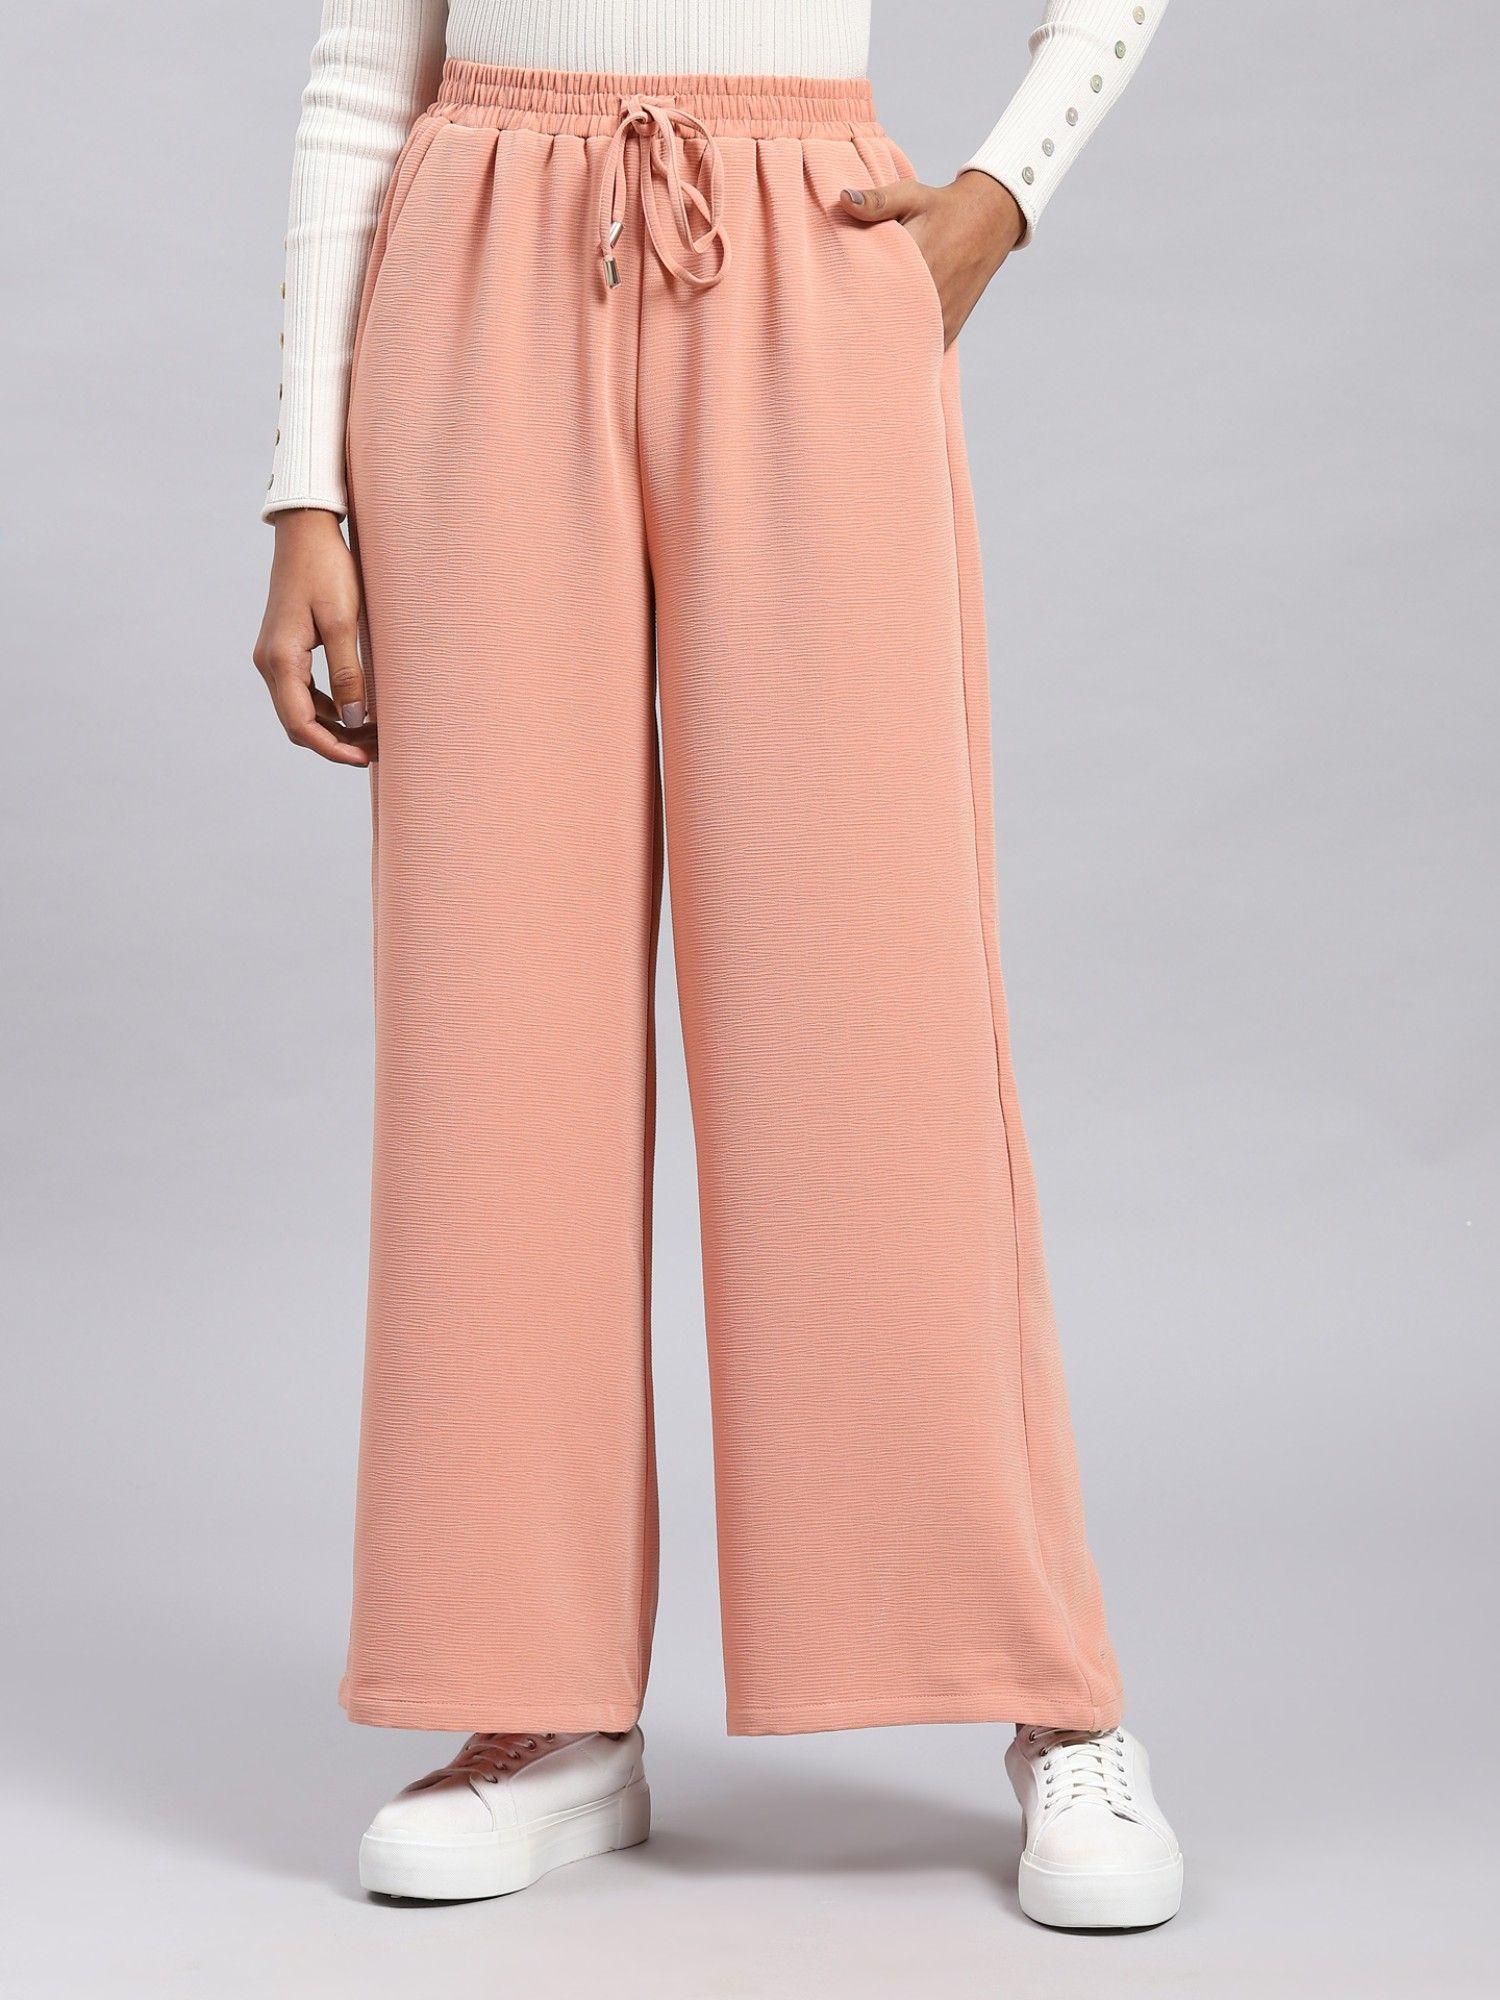 peach elasticated pant with drawstring